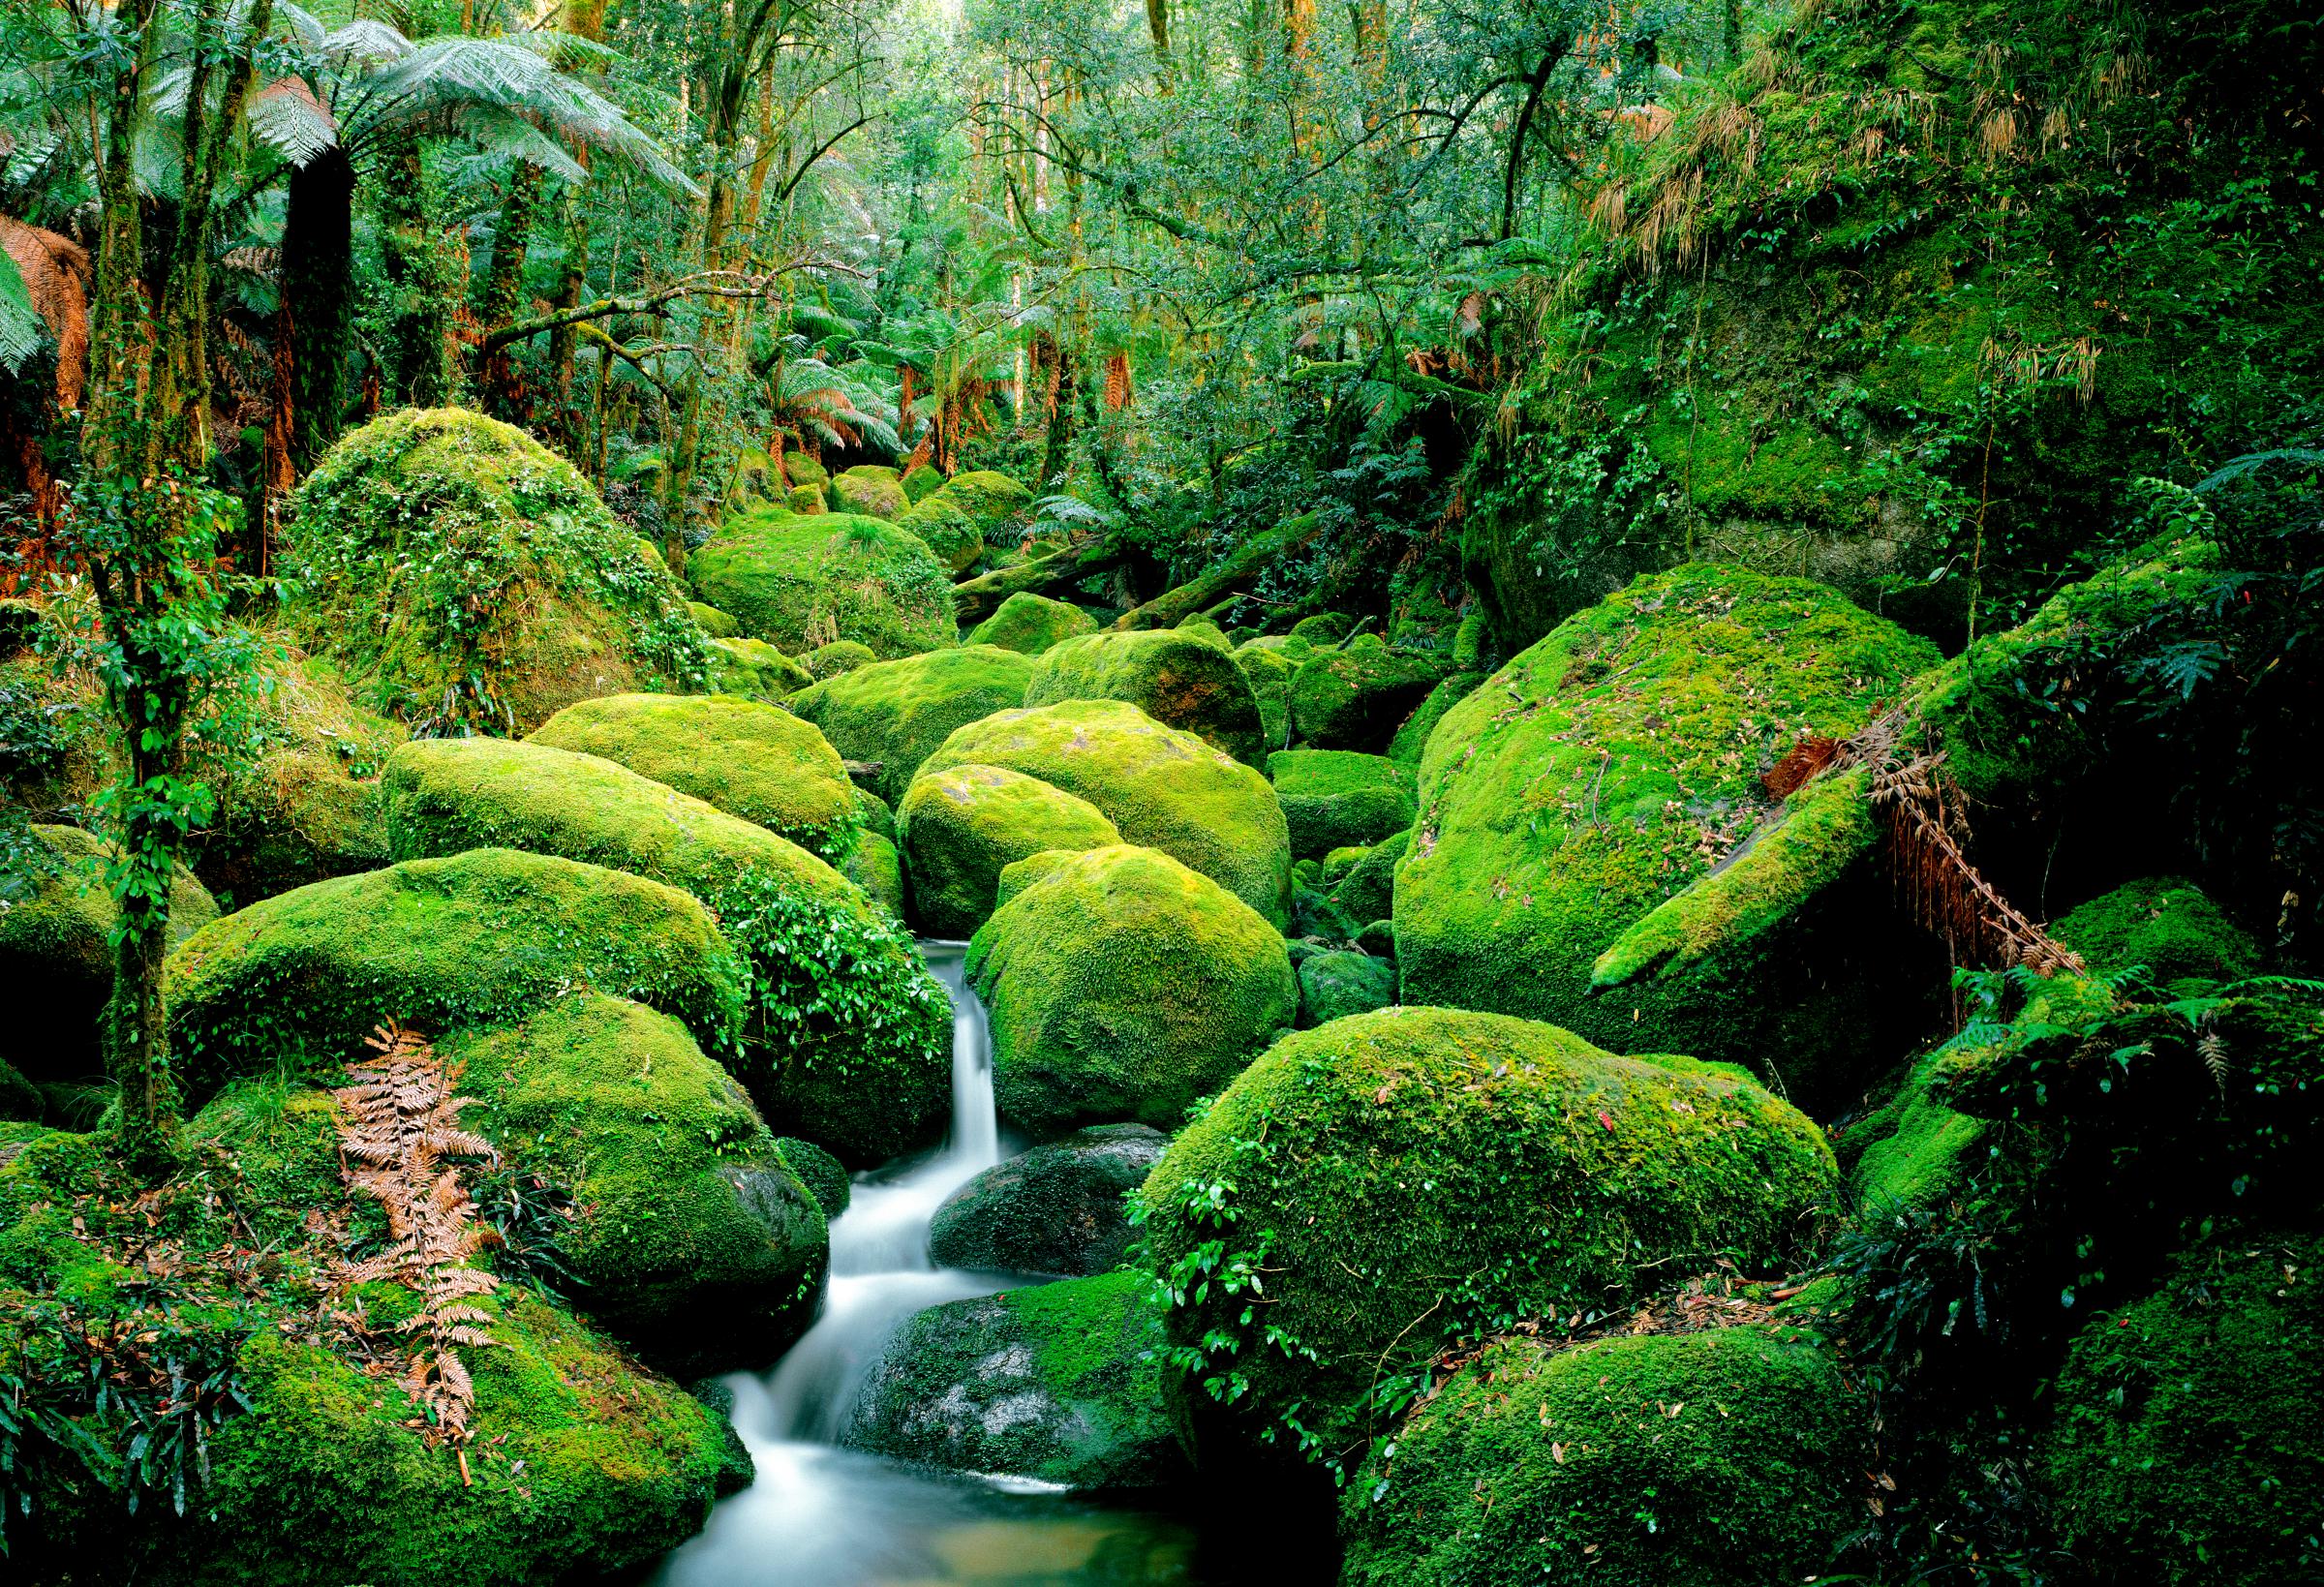 Carters Creek, flowing through moss-covered boulders, Bemboka Section, South East Forest National Park, New South Wales, Australia